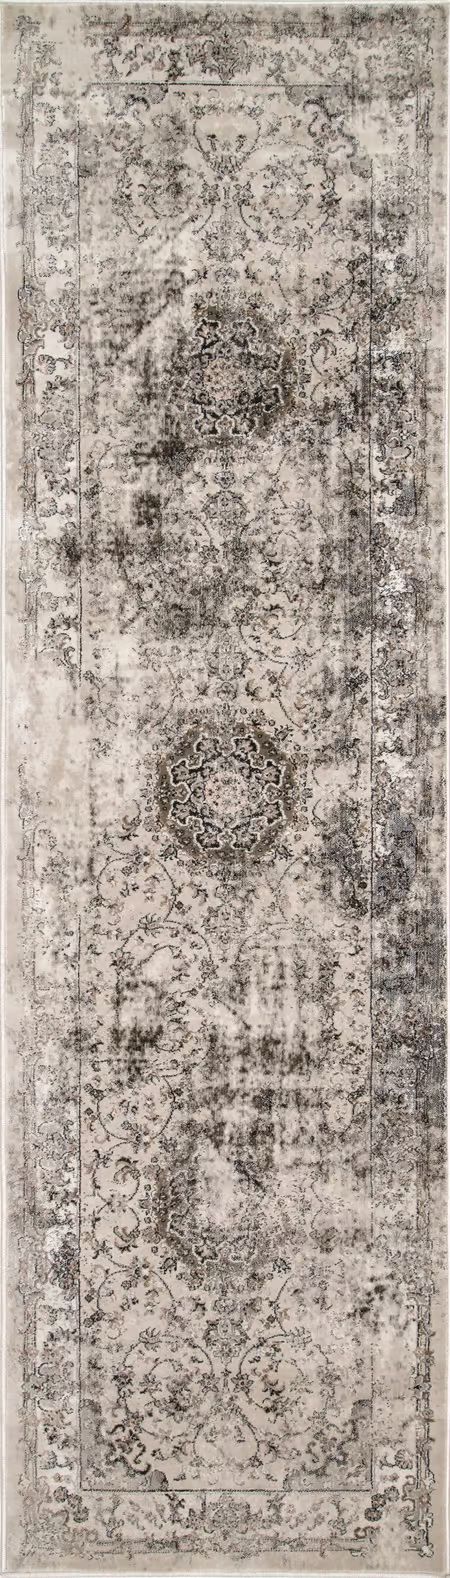 Ivory Faded Crowned Rosette 2' 5" x 8' Area Rug | Rugs USA